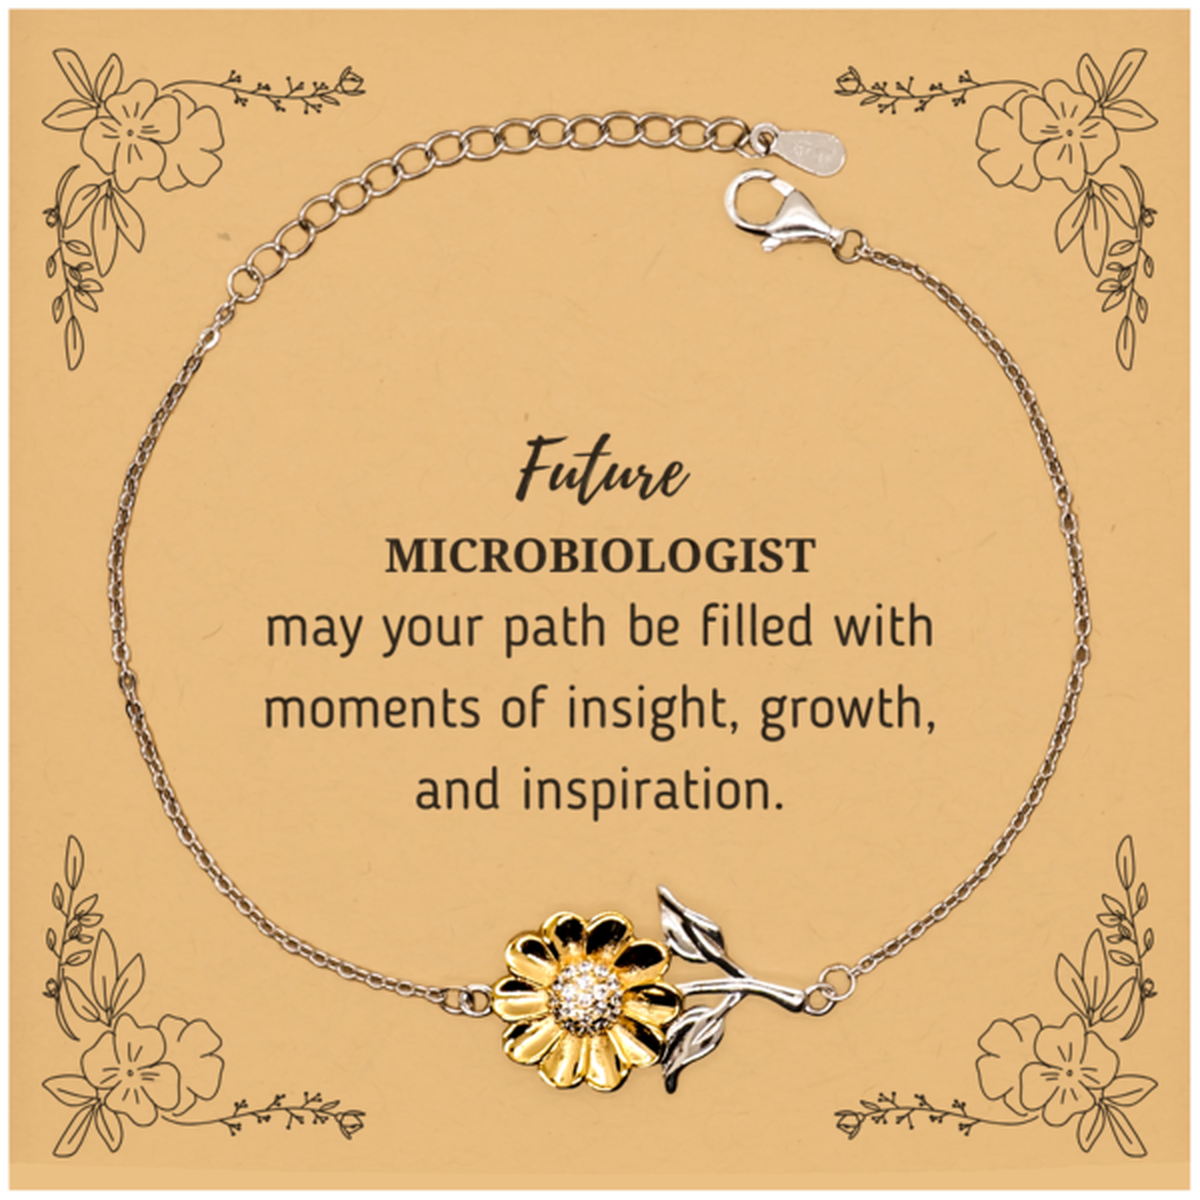 Future Microbiologist Gifts, May your path be filled with moments of insight, Graduation Gifts for New Microbiologist, Christmas Unique Sunflower Bracelet For Men, Women, Friends